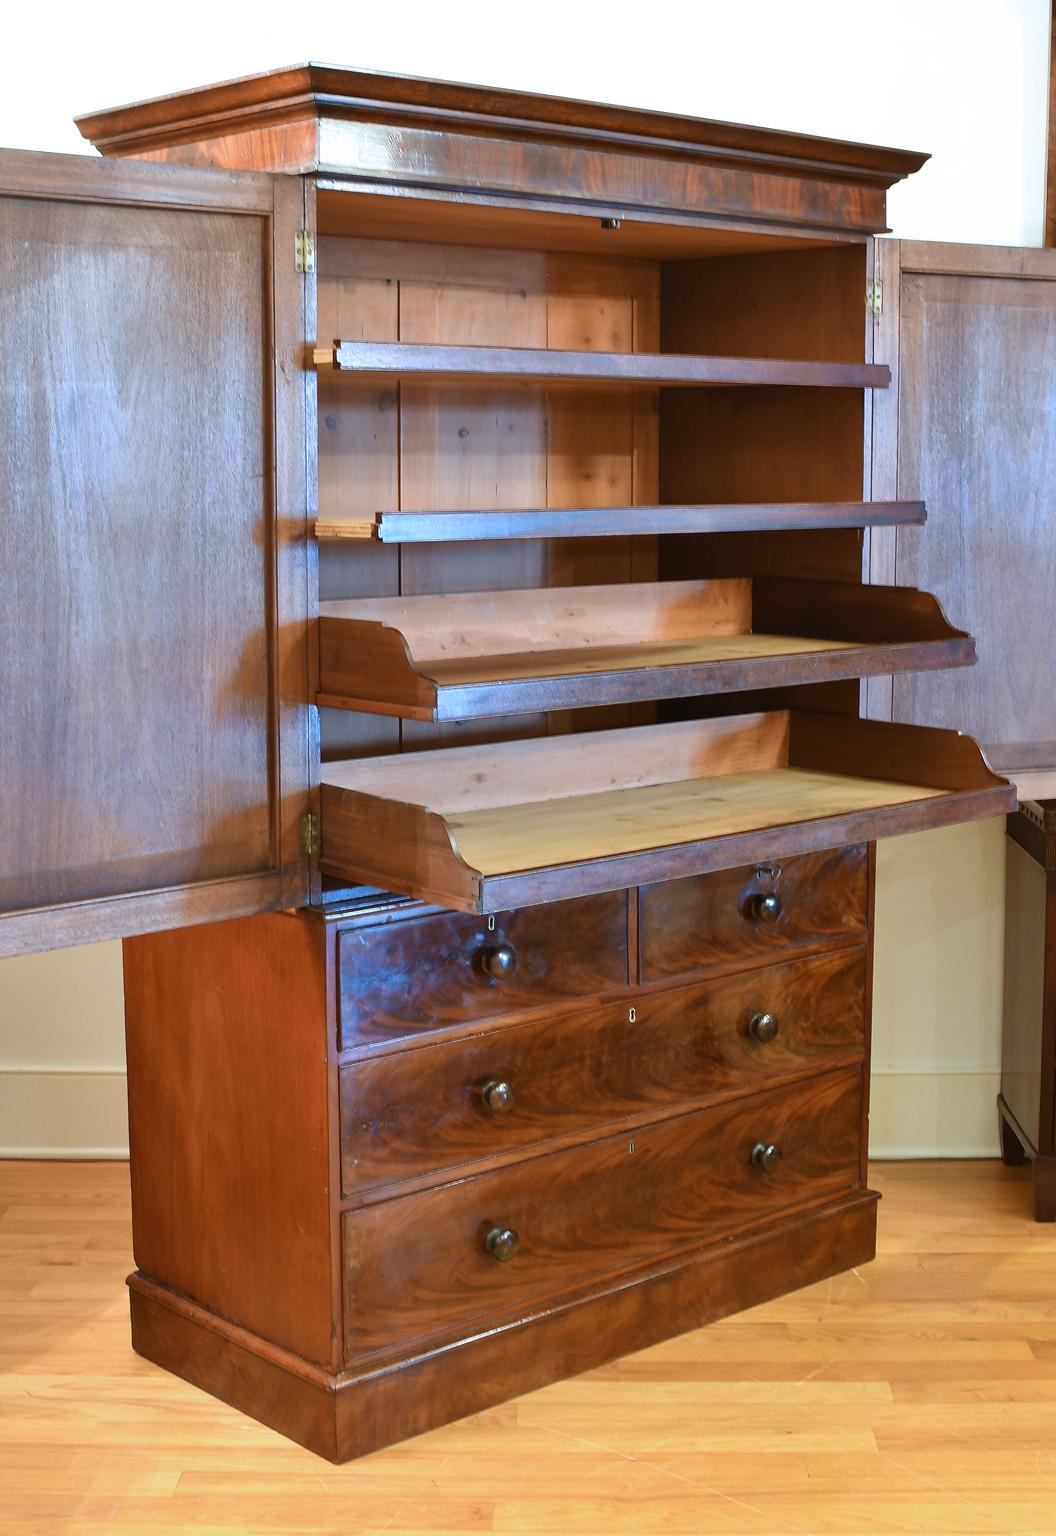 Polished Antique English Linen Press in West Indies Mahogany w/ Drawers & Enclosed Trays